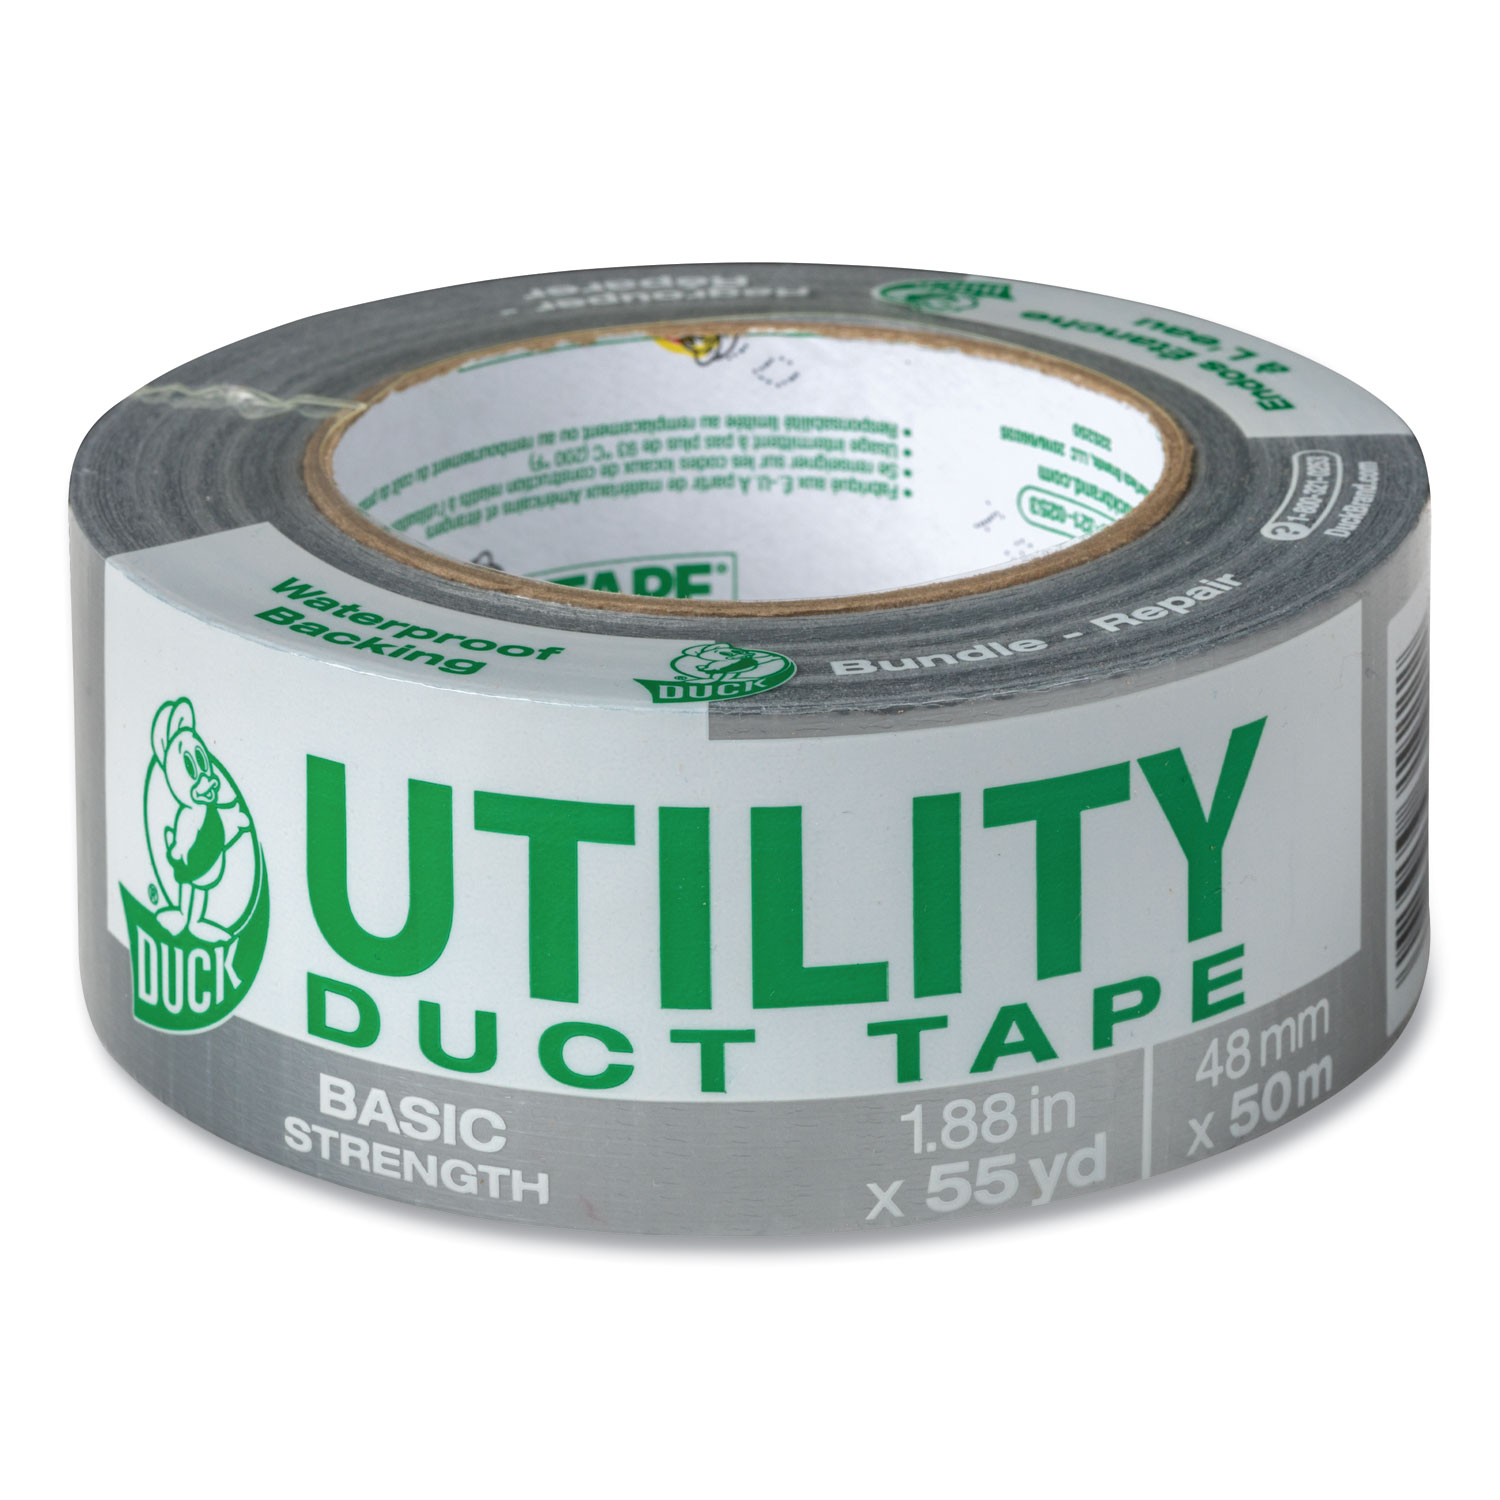  Duck 1118393 Utility Duct Tape, 3 Core, 1.88 x 55 yds, Silver (DUC1118393) 